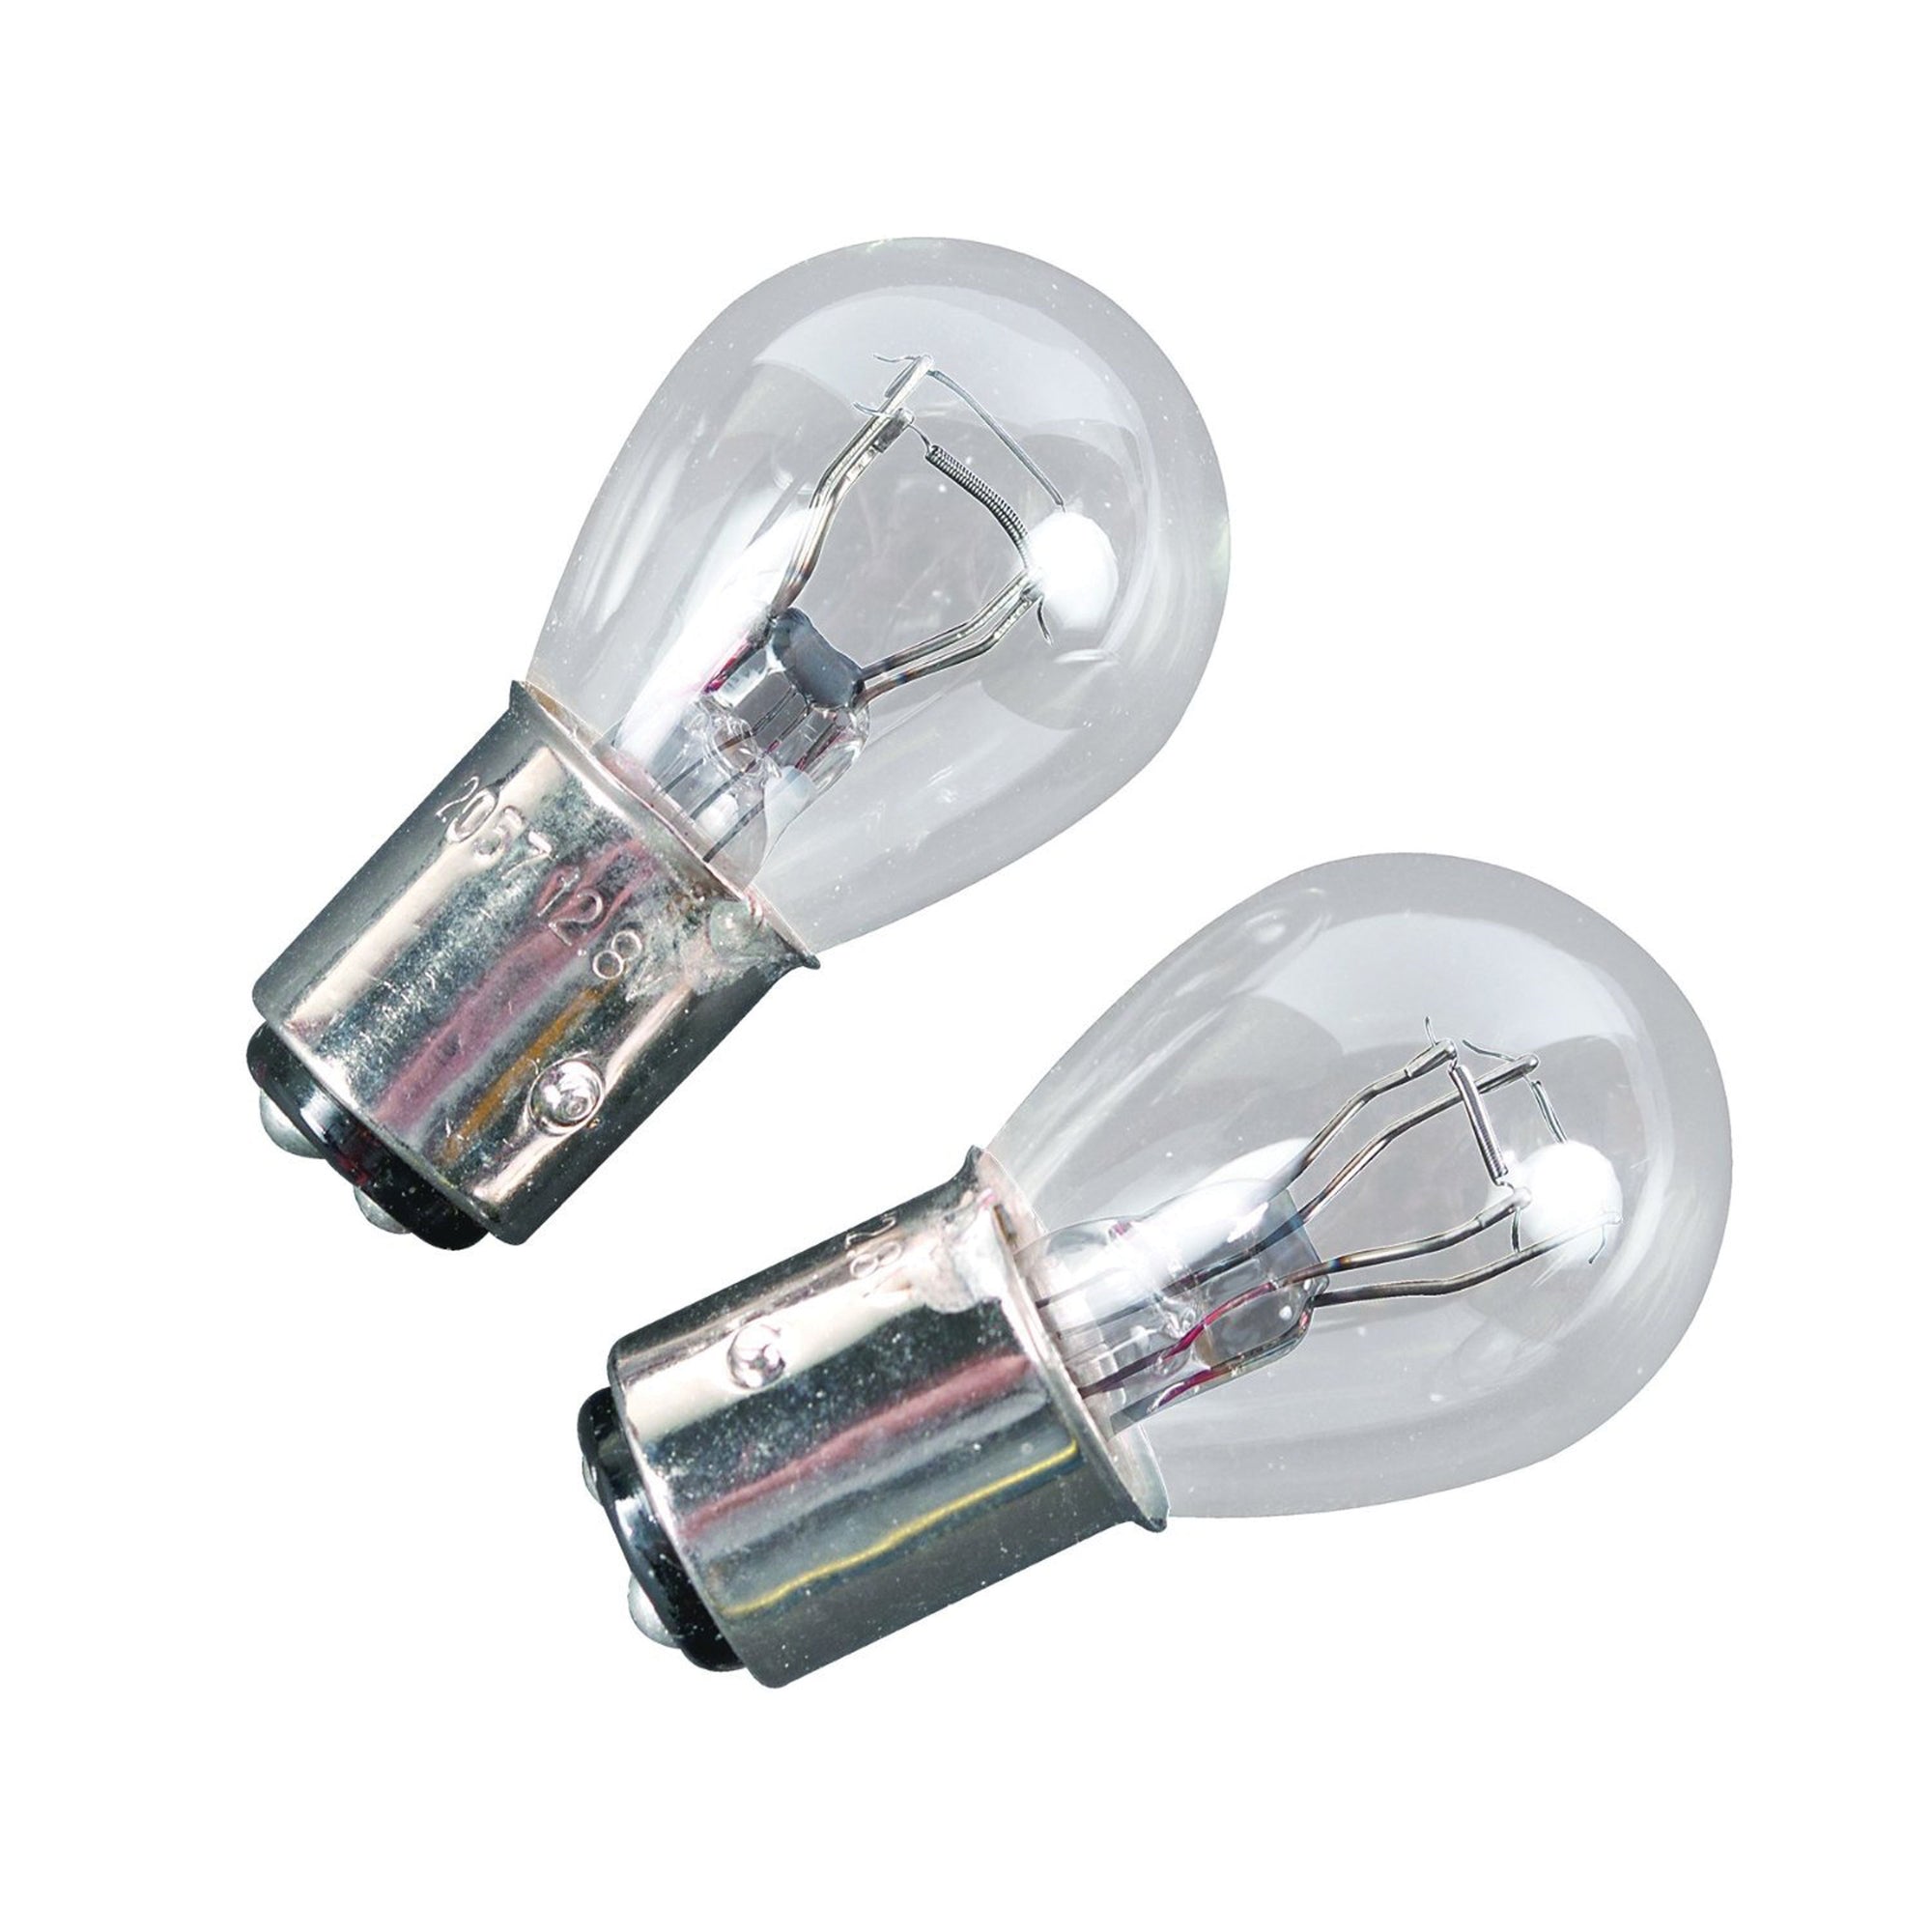 Camco 54839 Automotive Park/Taillight/Signal Bulb #2057 - Pack of 2